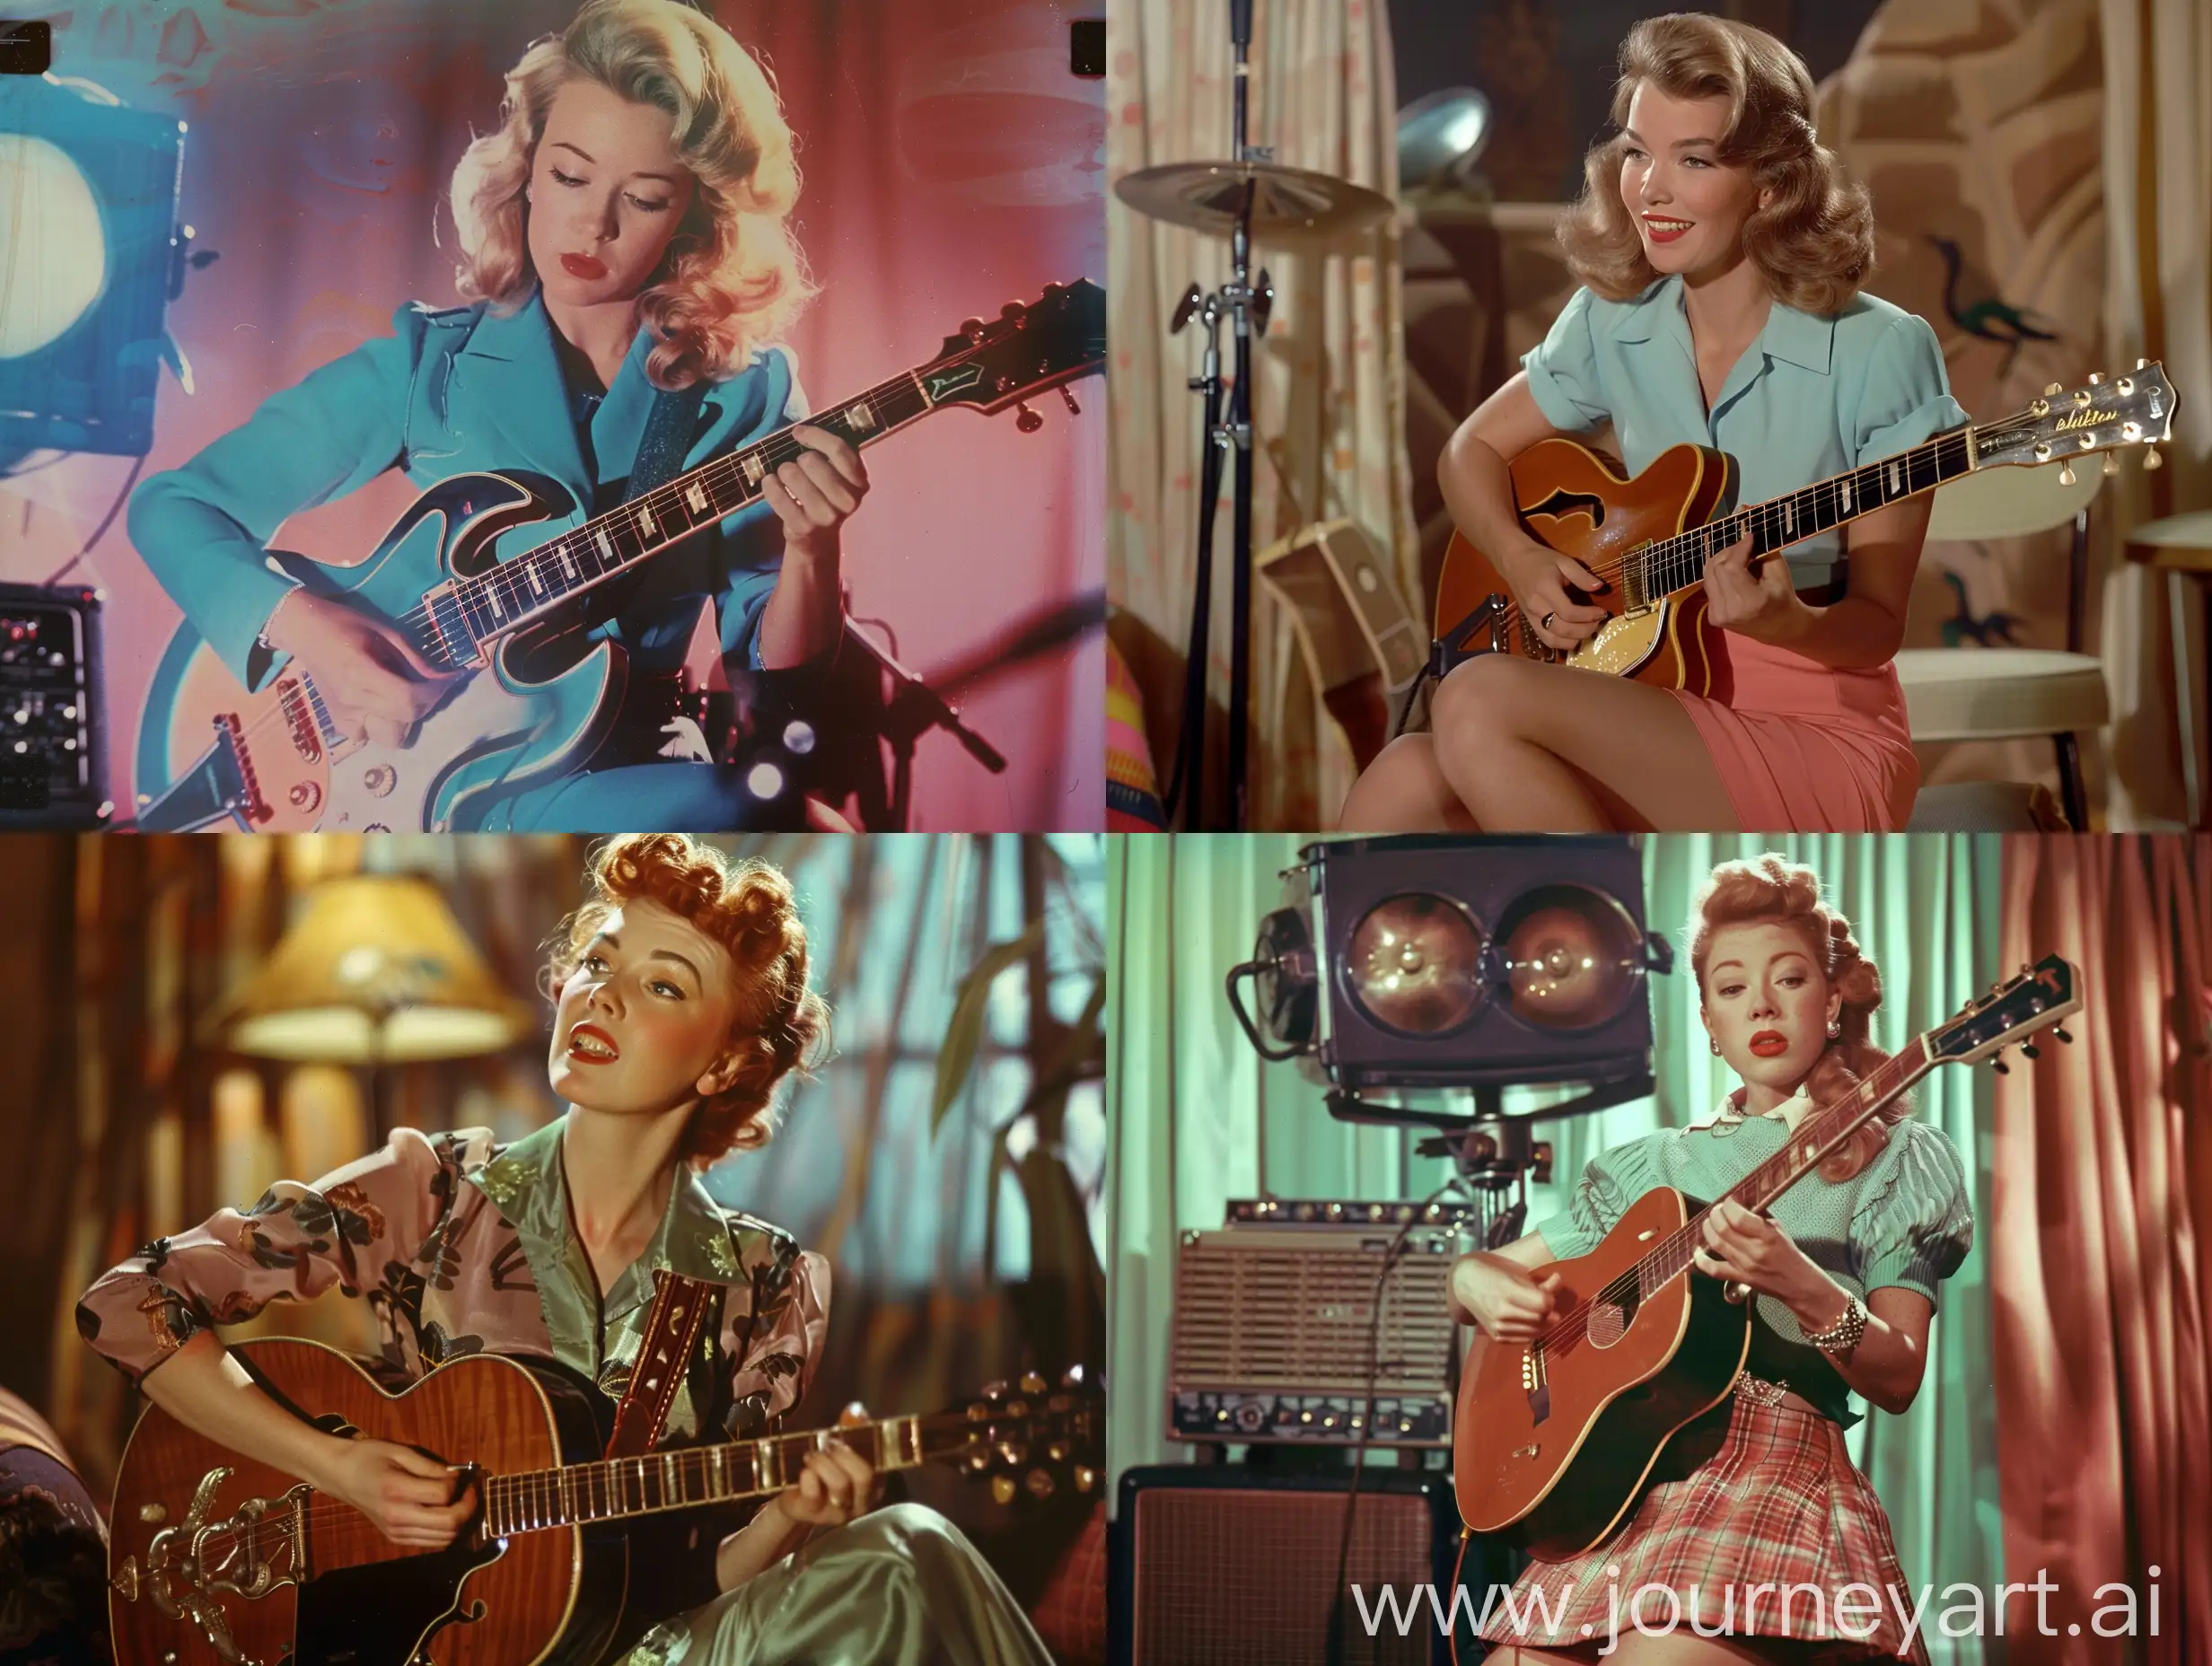 Phoebe-Buffay-Playing-Guitar-in-Vibrant-1950s-Style-Colory-Image